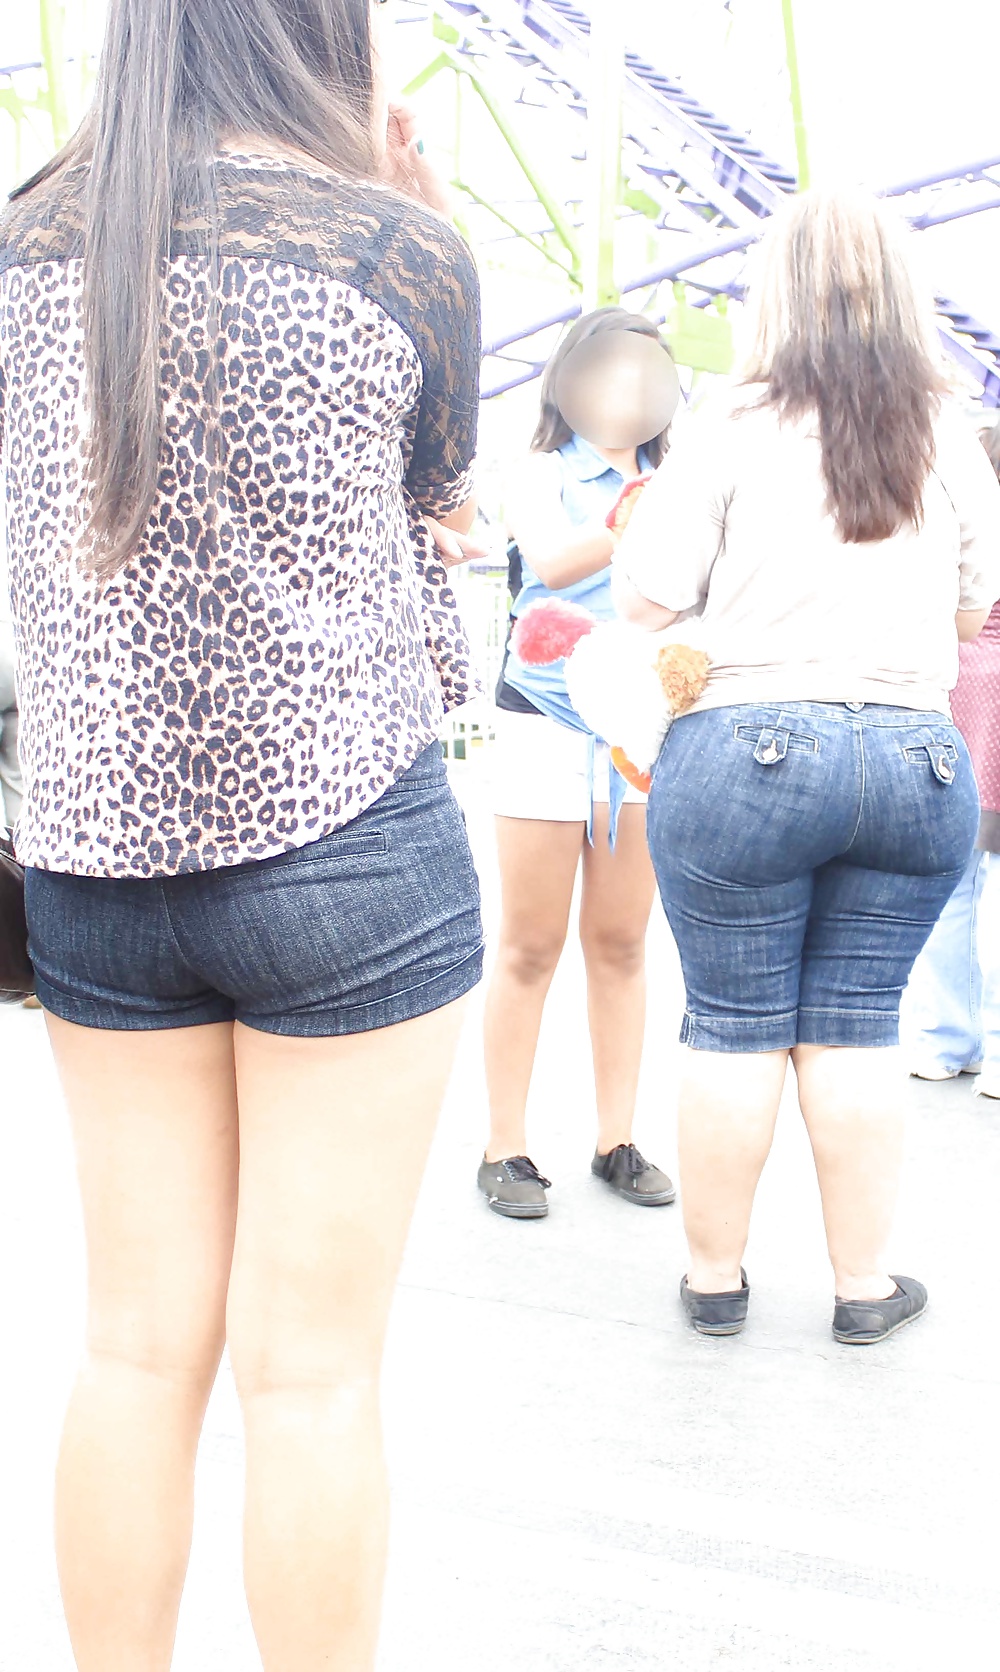 Candid Huge Latina Mom Ass in Jeans #31359603